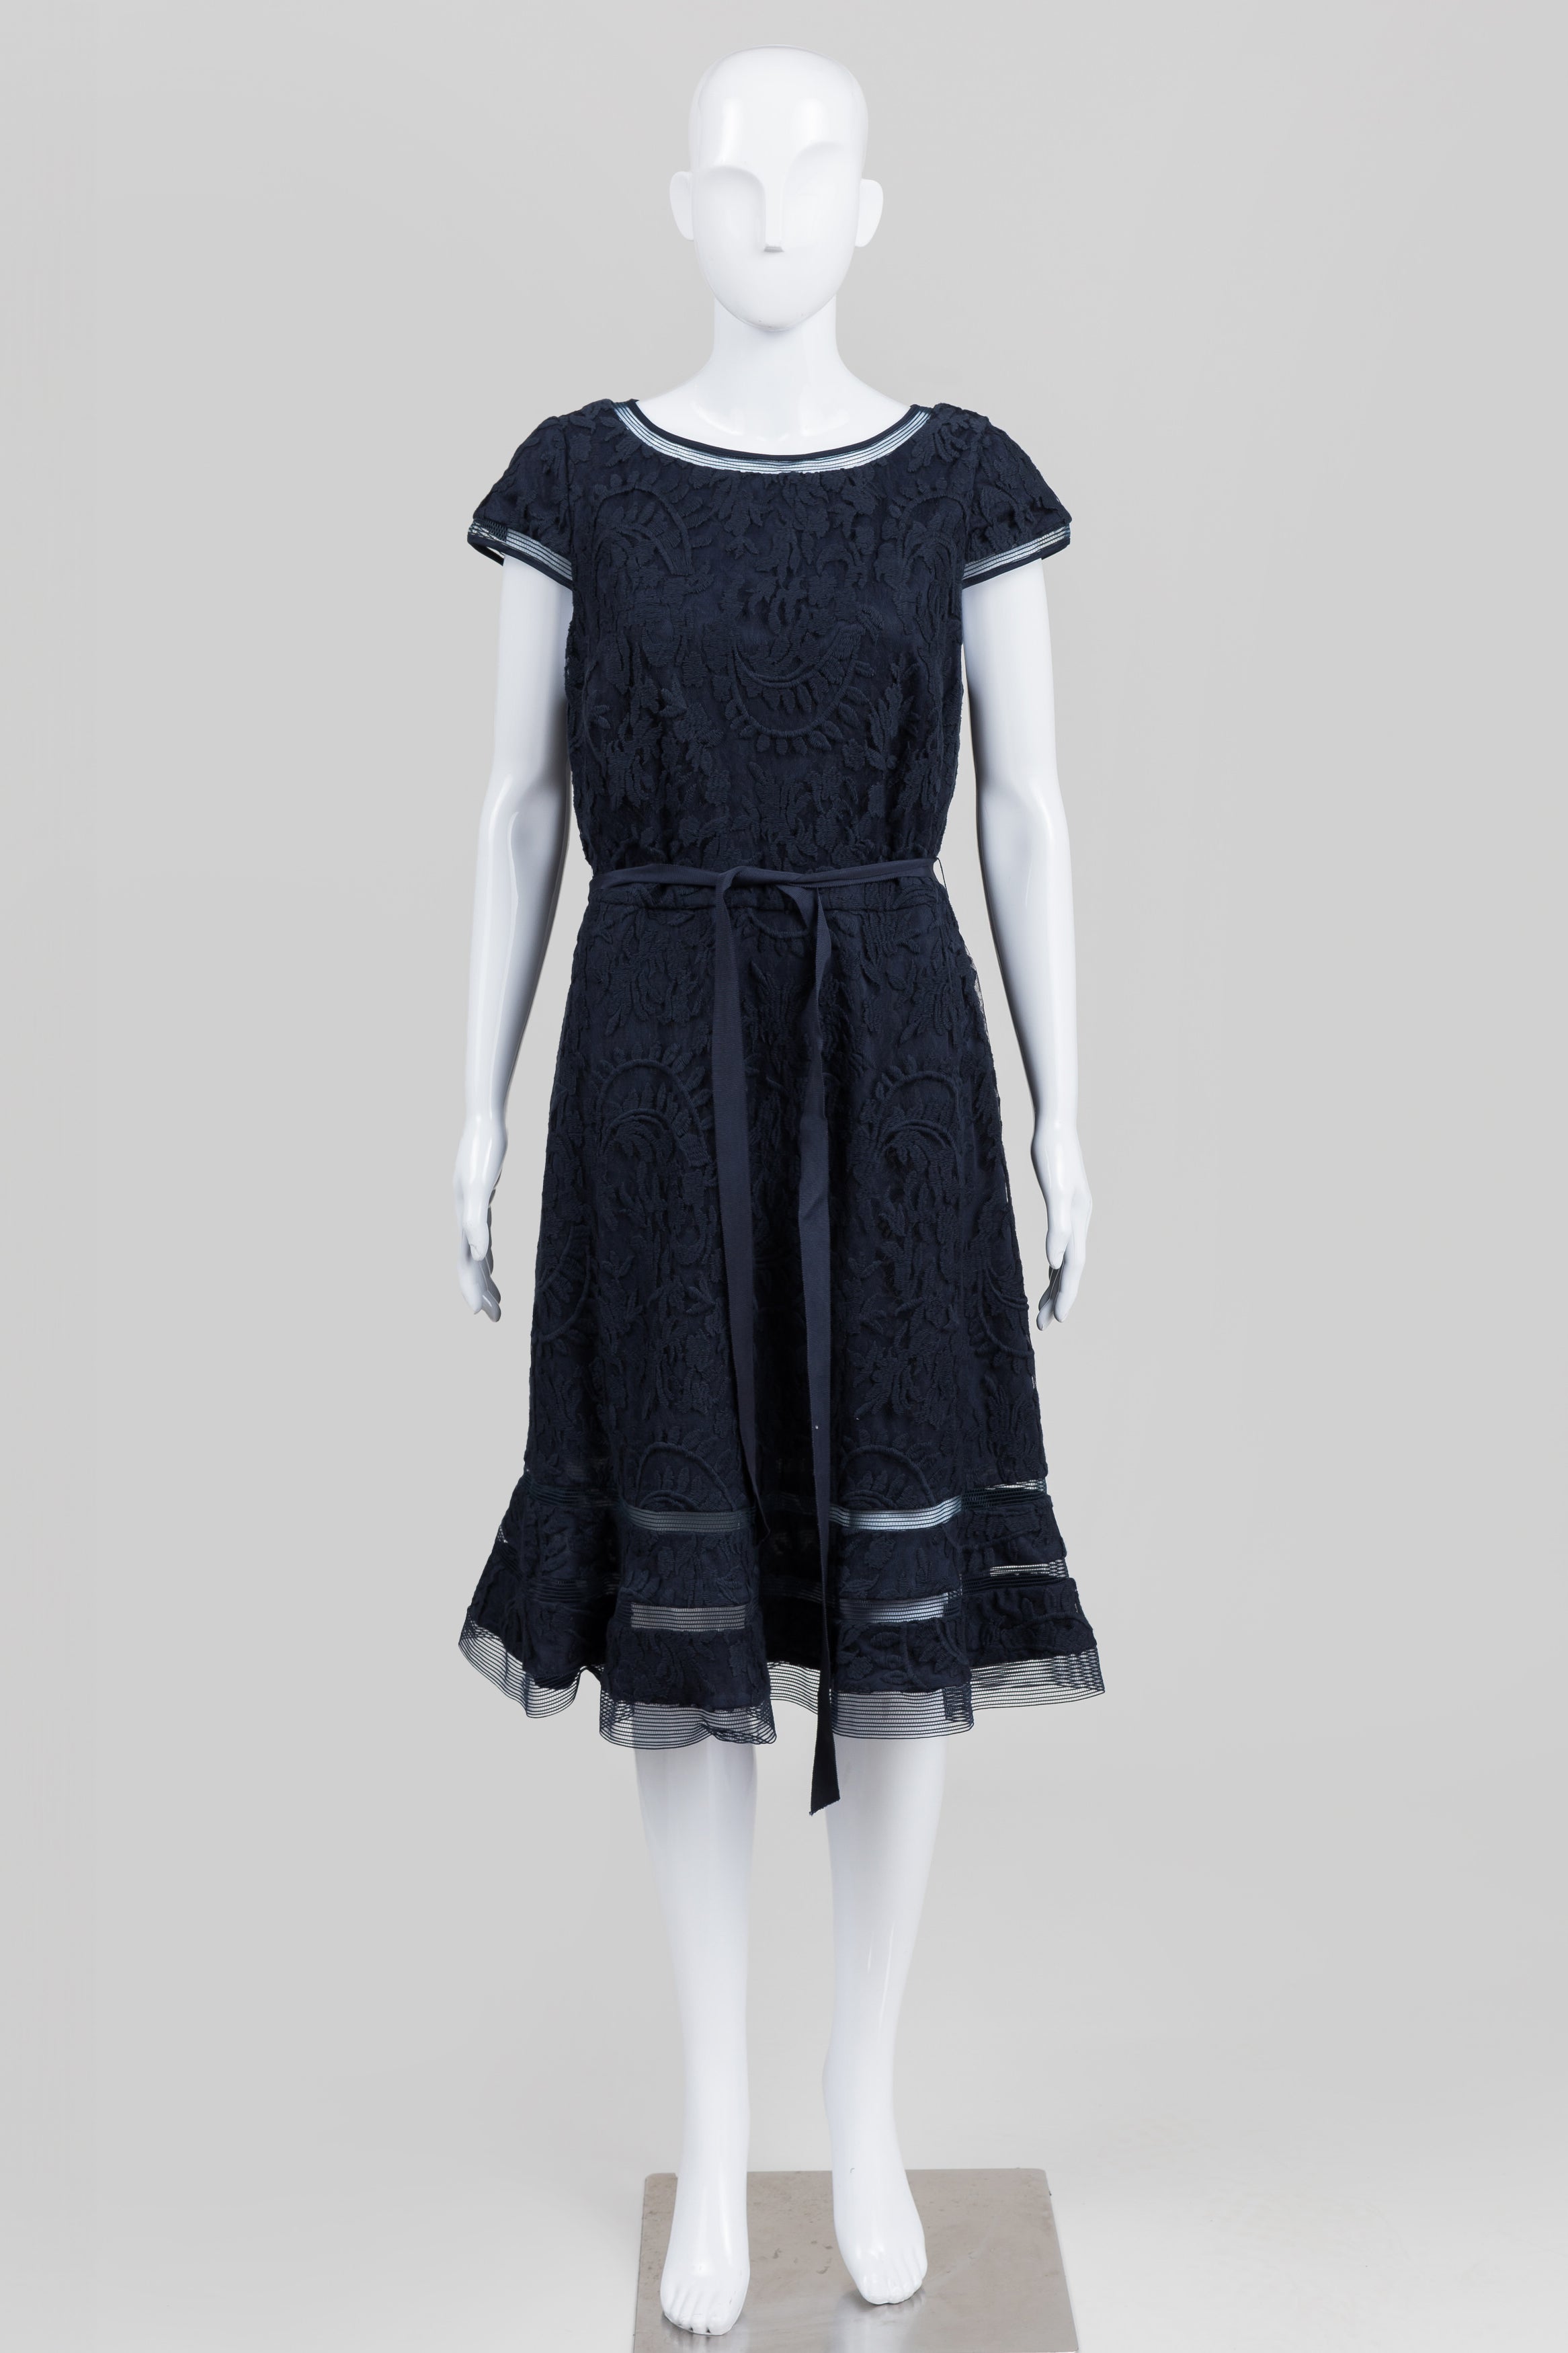 Adrianna Papell Navy Lace Cocktail Dress (16)